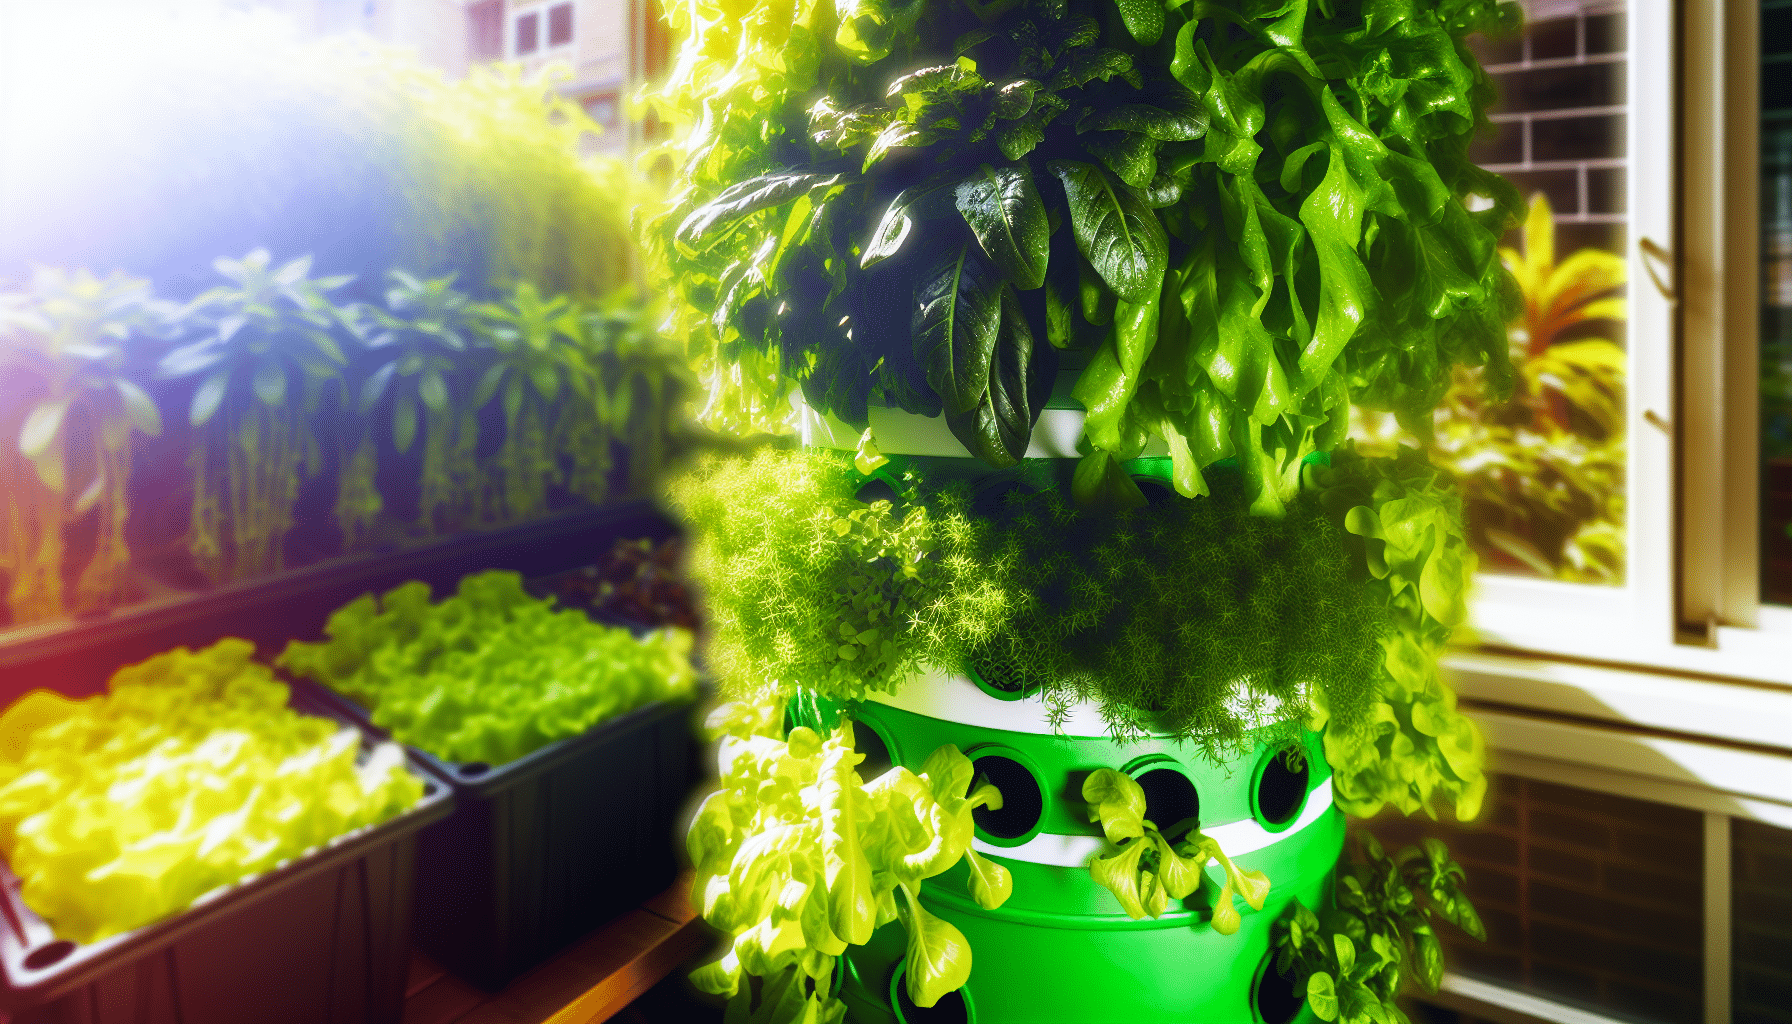 A vibrant hydroponics tower garden with various leafy greens and herbs